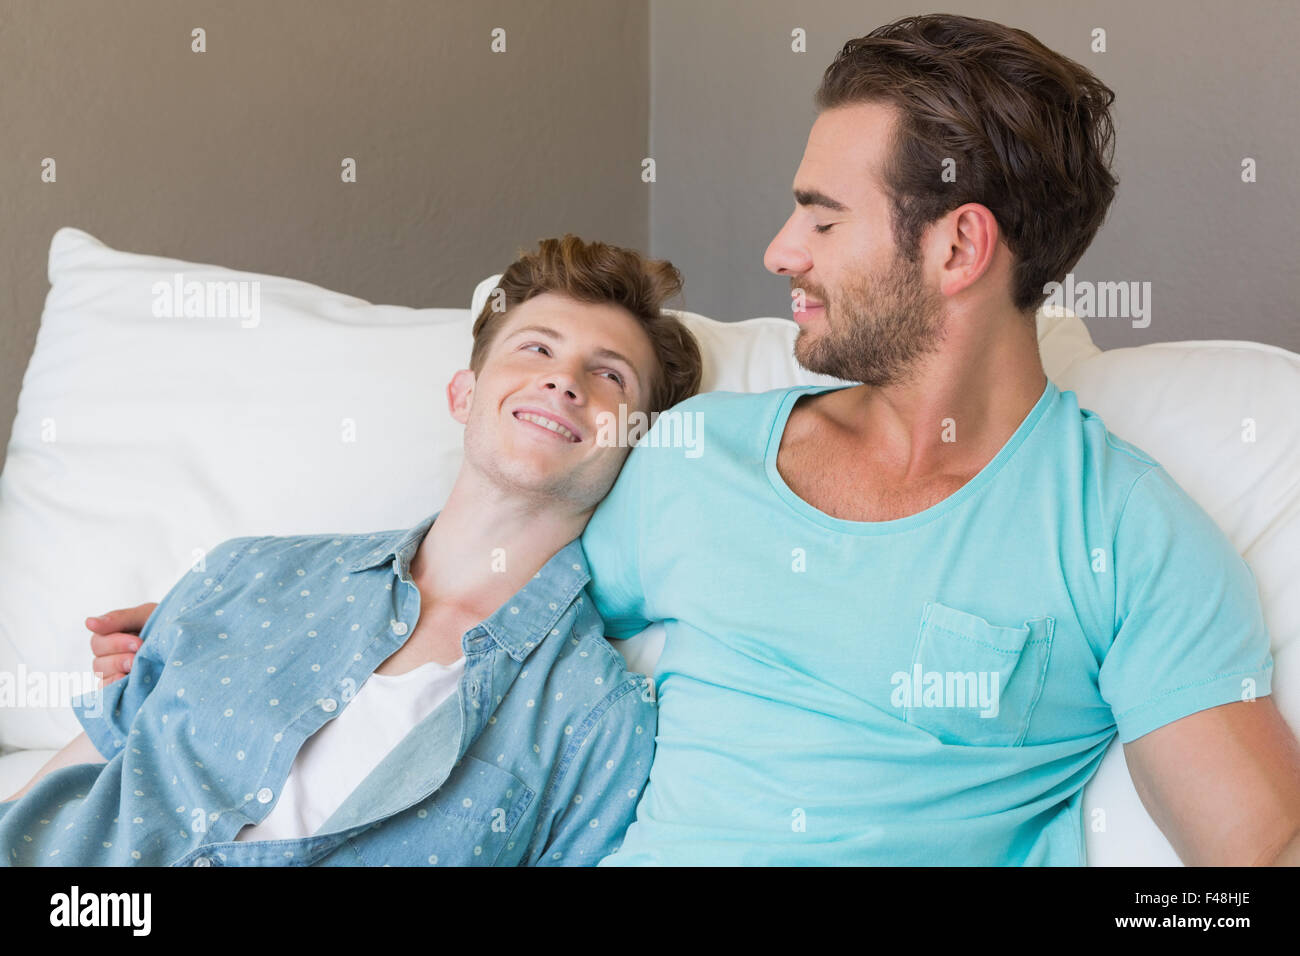 Happy homosexual couple hugging and looking at each other on couch Stock Photo